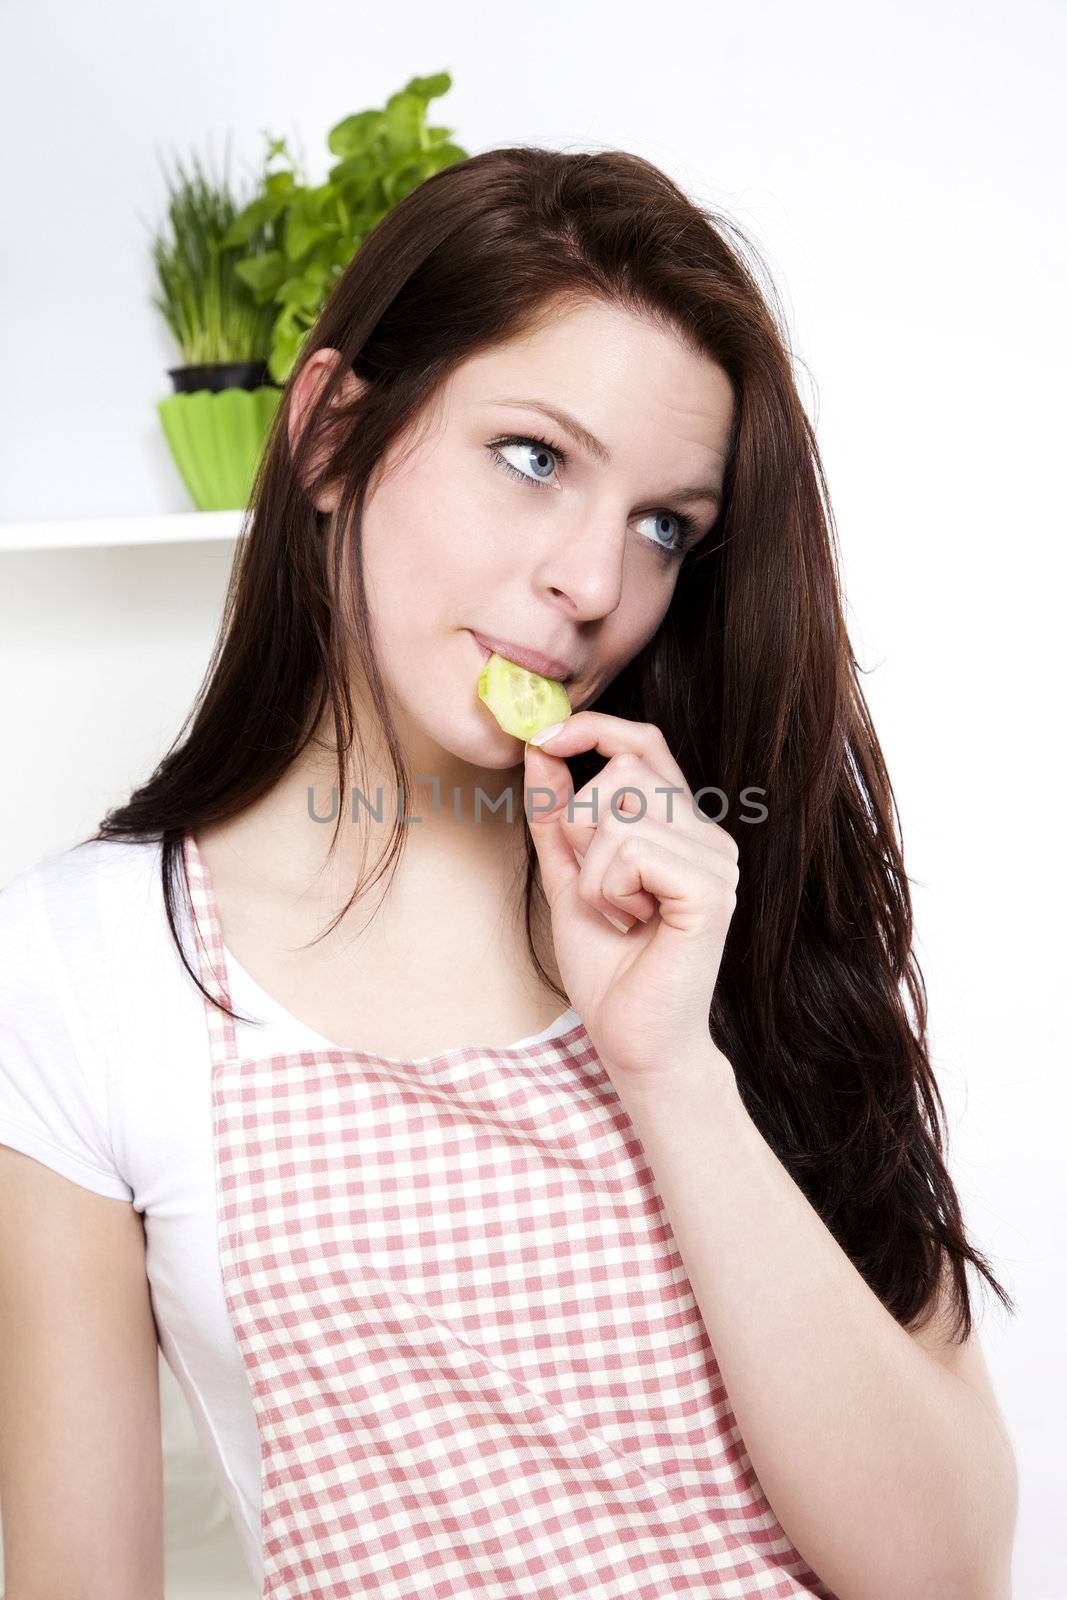 young woman nibbling on a cucumber by RobStark